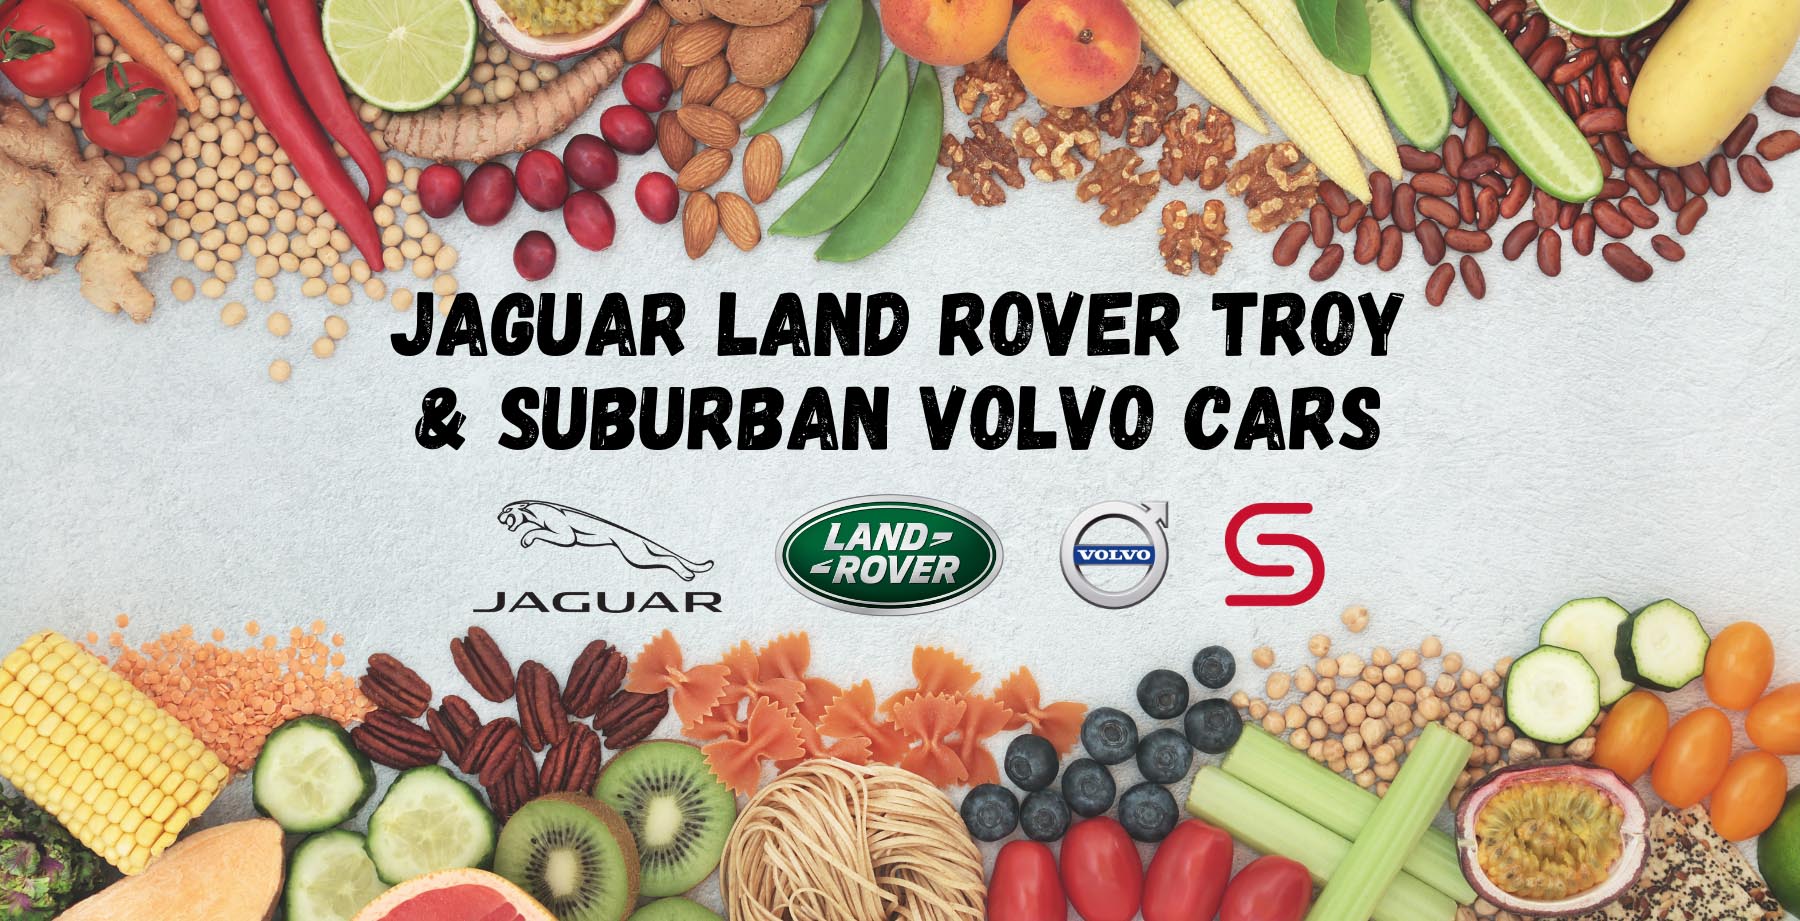 Jaguar Land Rover Troy and Suburban Volvo Cars